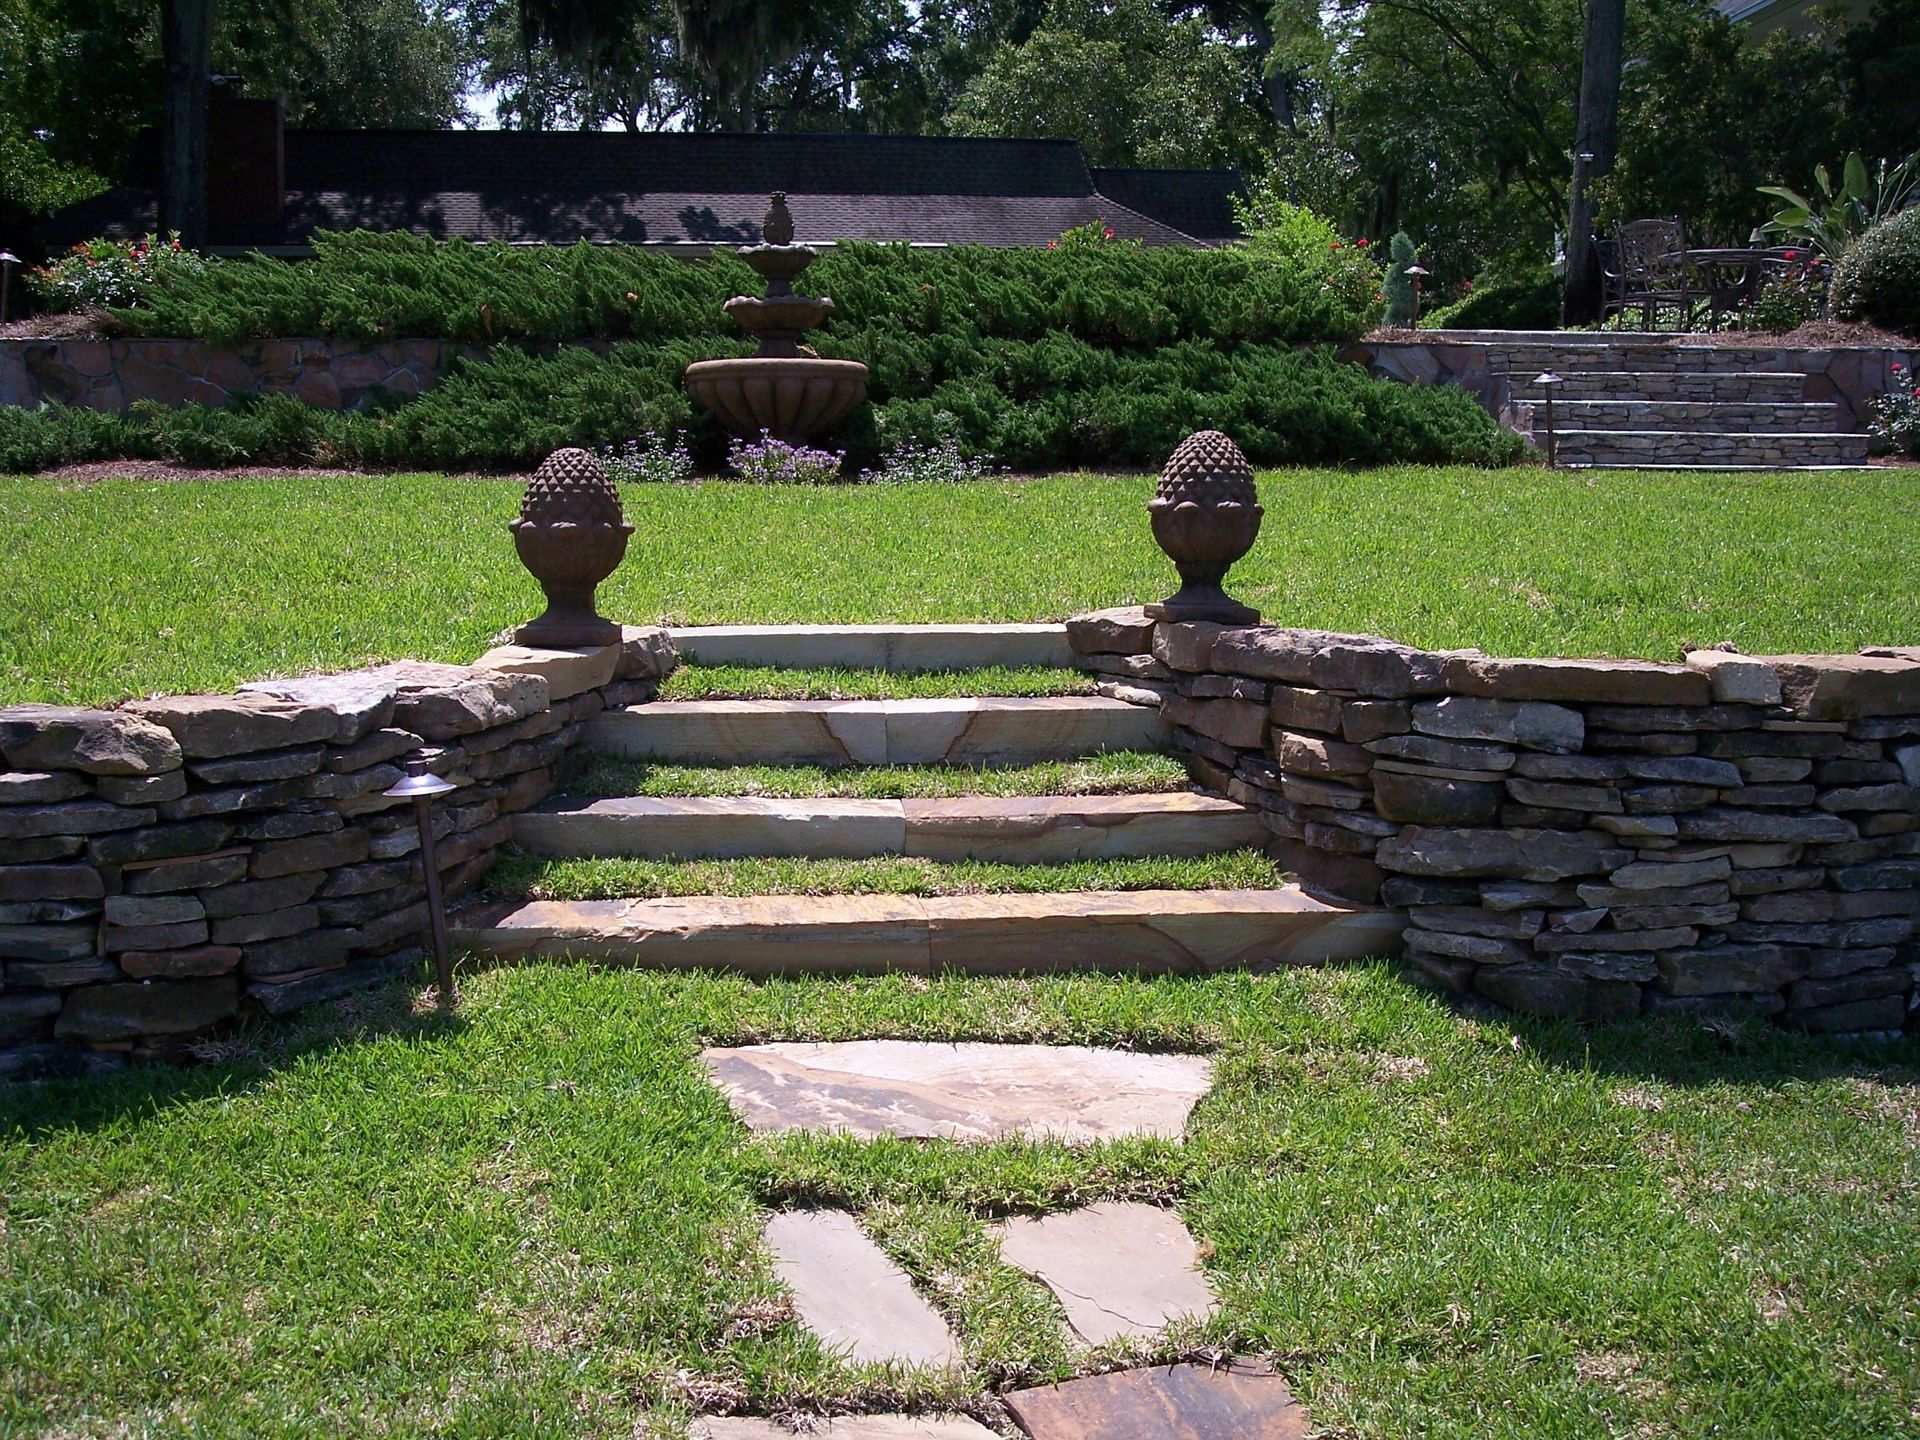 flagstone patio, flagstone steps, stone wall, stone retaining wall, stone baluster, hardscape, paver, stone pavers, stone, decorative stone, patio, paver patio, stone paver patio, walkway, paver walkway, stone walkway, walkway stones, stone paver walkway, garden stones, walkway stones, garden walkway, paver landscaping, stone steps, paver steps, pool deck, paver pool deck, paver pool decking, pool coping, natural stone, stone, stacked stone, veneer, stone veneer, flagstone, bluestone, thermal bluestone, spa design, pool deck design, outdoor kitchen, summer kitchen, fire pit, firepit, sitting wall, pergola, hand-made pergola, seating area, outdoor living, outdoor entertaining, paver contractor, paver design, paver install, paver installation, paver expert, paver experts, warranty, labor warranty, expert installation, expert install, licensed and insured, licensed, insured, licensed insured, award winning designs, Angie's List Super Service Award, Angie's List Award, customer reviews, excellent reputation, reputation, fireplace, fireplace renovation, stone fireplace, fireplace veneer, fireplace reconstruction, before and after pictures, years experience, experienced, Jacksonville, Ponte Vedra, Nocatee, Fleming Island, Queens Harbor, St. Johns, Fruit Cove, St. Augustine, Jacksonville pavers, paver driveway Jacksonville, Jacksonville paver driveway, Jacksonville driveway, paver patio Jacksonville, patio Jacksonville, Jacksonville paver patio, Jacksonville patio, Ponte Vedra pavers, paver driveway Ponte Vedra, driveway Ponte Vedra, Ponte Vedra paver driveway, Ponte Vedra driveway, paver patio Ponte Vedra, patio Ponte Vedra, Ponte Vedra paver patio, Ponte Vedra patio, Nocatee pavers, driveway Nocatee, paver driveway Nocatee, Nocatee driveway, Nocatee paver driveway, paver patio Nocatee, patio Nocatee, Nocatee paver patio, Nocatee patio, Sawgrass pavers, Sawgrass paver driveway, Sawgrass driveway, driveway Sawgrass, paver driveway Sawgrass, paver patio Sawgrass, patio Sawgrass, Sawgrass patio, Sawgrass paver patio, Fleming Island pavers, Fleming Island paver driveway, paver driveway Fleming Island, Fleming Island driveway, driveway Fleming Island, paver patio Fleming Island, Fleming Island paver patio, patio Fleming Island, Fleming Island patio, Queens Harbor pavers, paver driveway Queens Harbor, Queens Harbor paver driveway, Queens Harbor driveway, driveway Queens Harbor, paver patio Queens Harbor, Queens Harbor paver patio, patio Queens Harbor, Queens Harbor patio, St. Johns pavers, St. Johns paver driveway, paver driveway St. Johns, St. Johns driveway, driveway St. Johns, St. Johns paver patio, paver patio St. Johns, patio St. Johns, St. Johns patio, Fruit Cove pavers, paver driveway Fruit Cove, Fruit Cove paver driveway, driveway Fruit Cove, Fruit Cove driveway, Fruit Cove paver patio, paver patio Fruit Cove, patio Fruit Cove, Fruit Cove patio, St. Augustine pavers, paver driveway St. Augustine, St. Augustine paver driveway, driveway St. Augustine, St. Augustine driveway, St. Augustine patio, patio St Augustine, St. Augustine paver patio, paver patio St. Augustine, Mandarin pavers, Mandarin paver driveway, paver driveway Mandarin, driveway Mandarin, Mandarin driveway, paver patio Mandarin, Mandarin paver patio, patio Mandarin, Mandarin patio